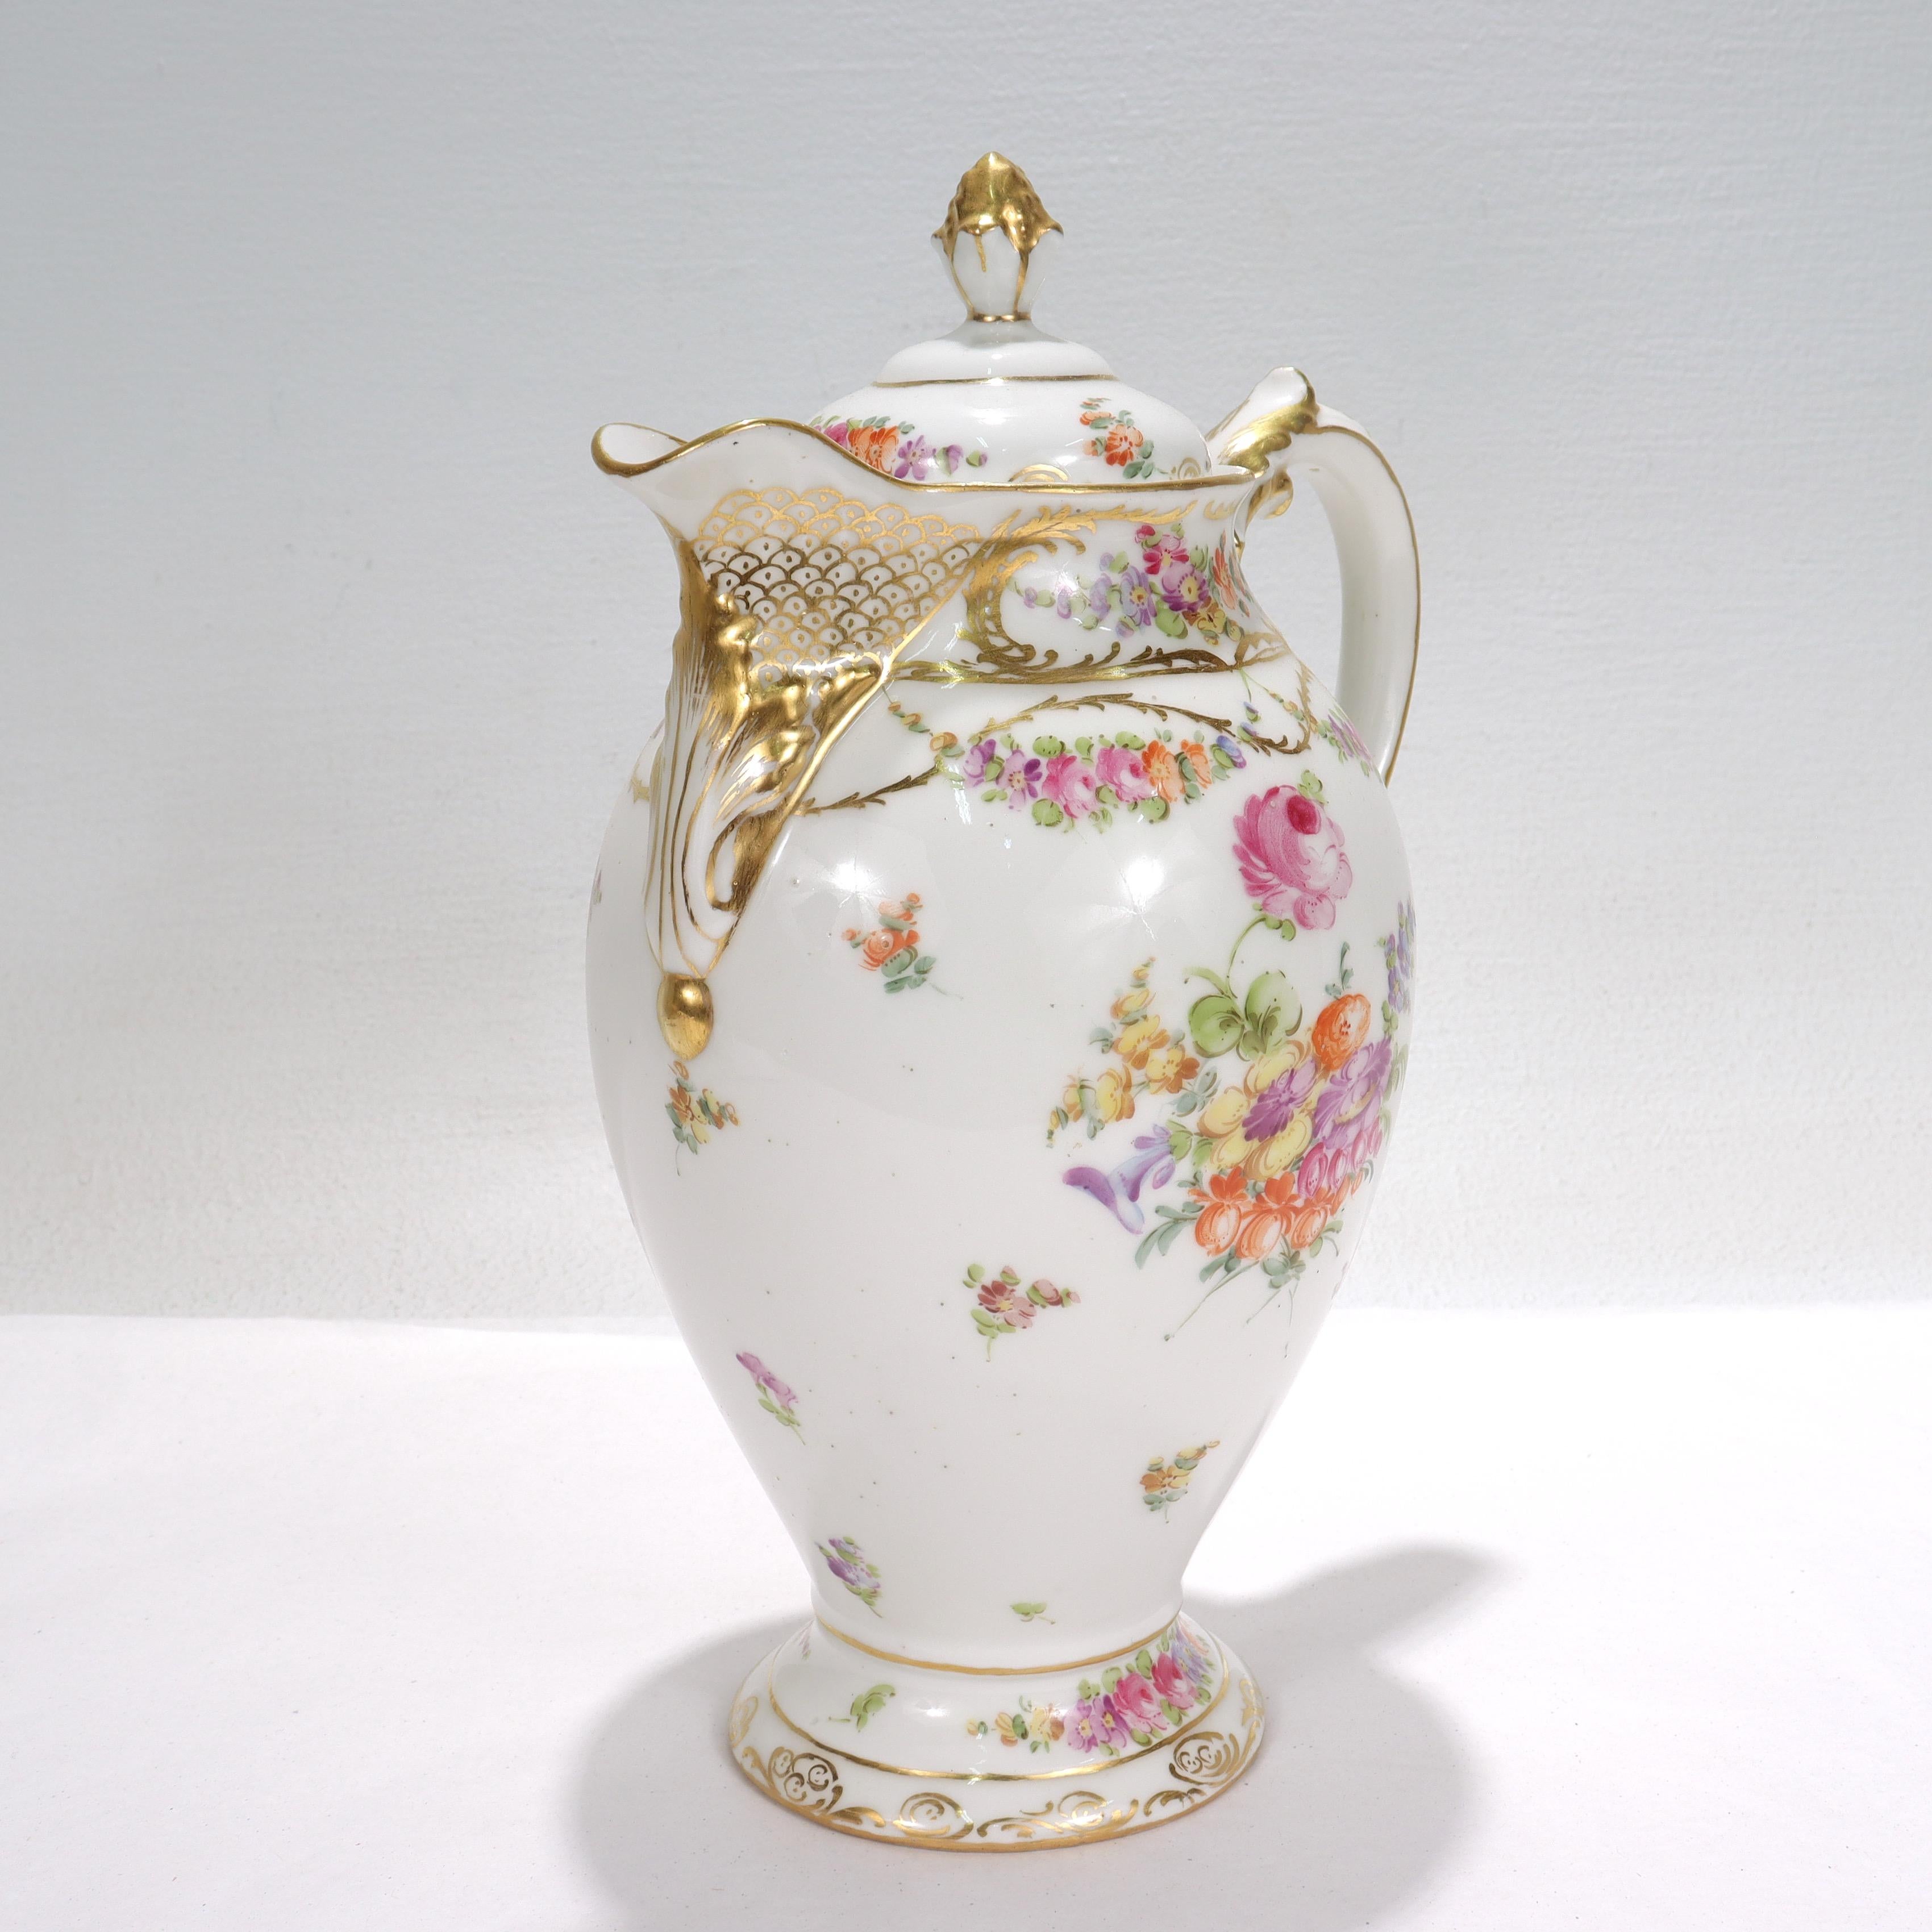 Antique Limoges Dresden Porcelain Chocolate Pot with Handpainted Flowers 2